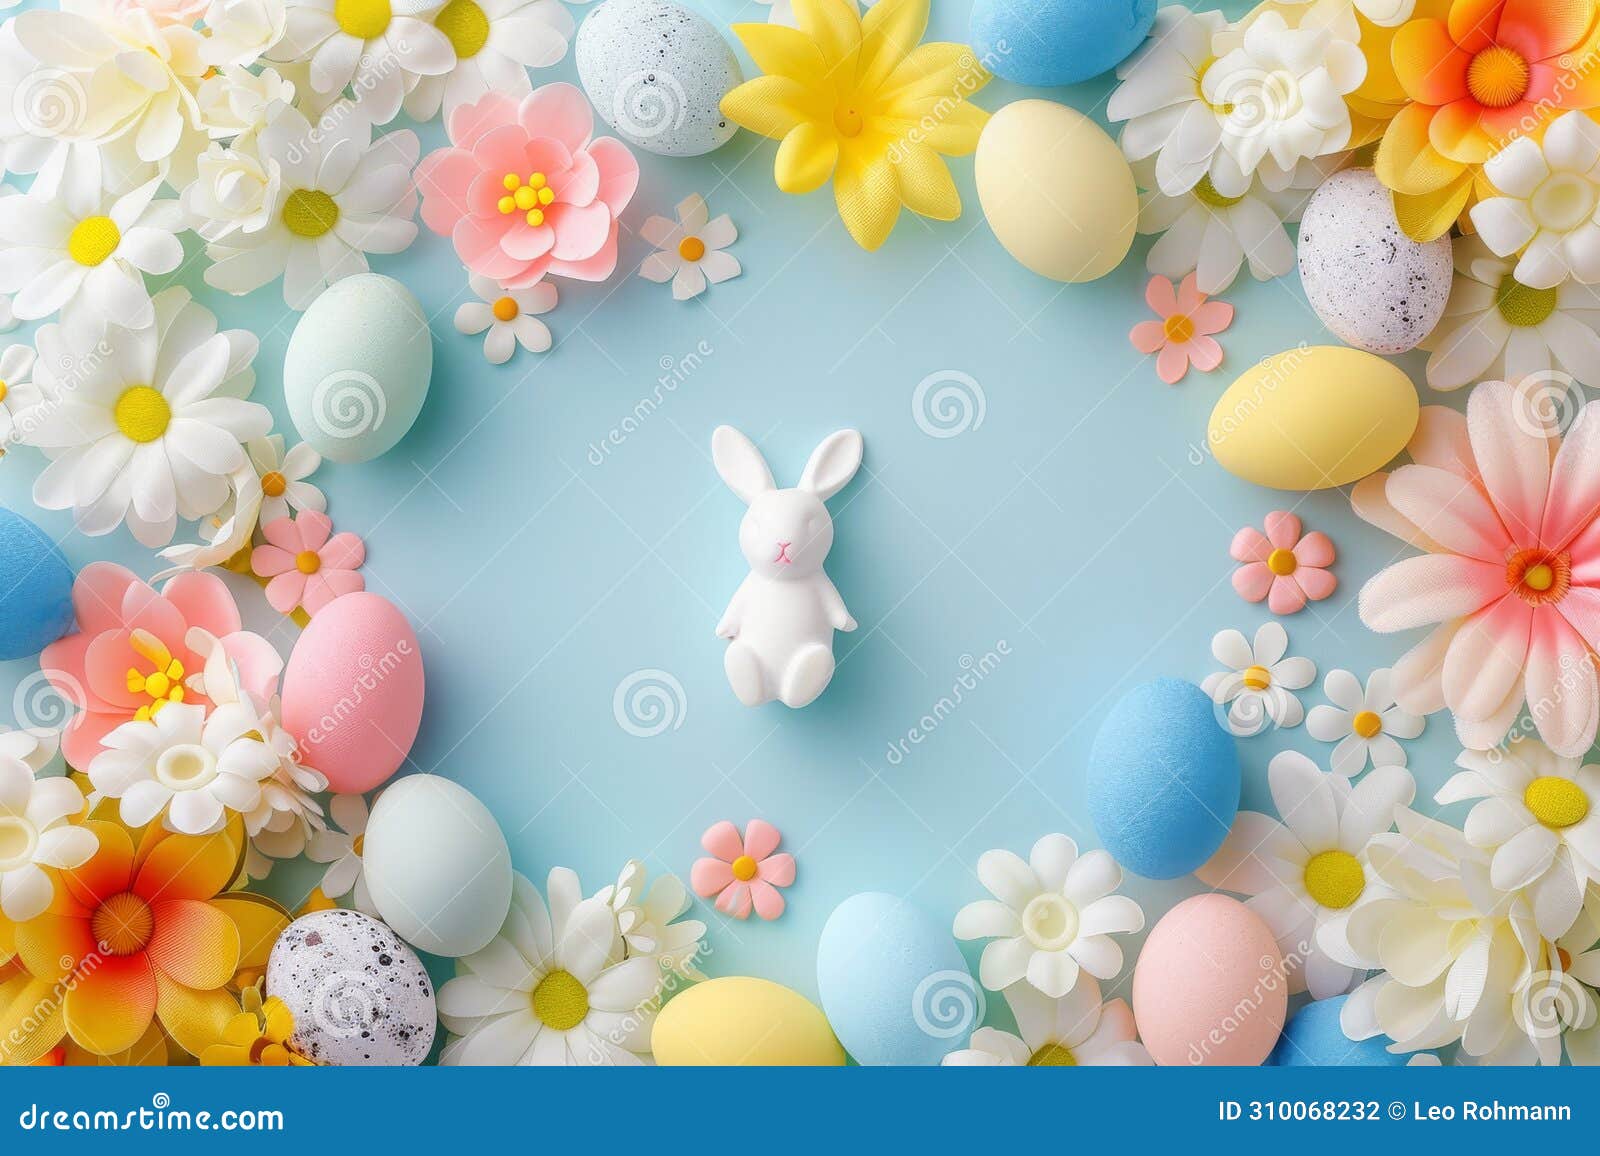 happy easter easter attire eggs skittish basket. white thinking of you card bunny radiant. easter graphics background wallpaper